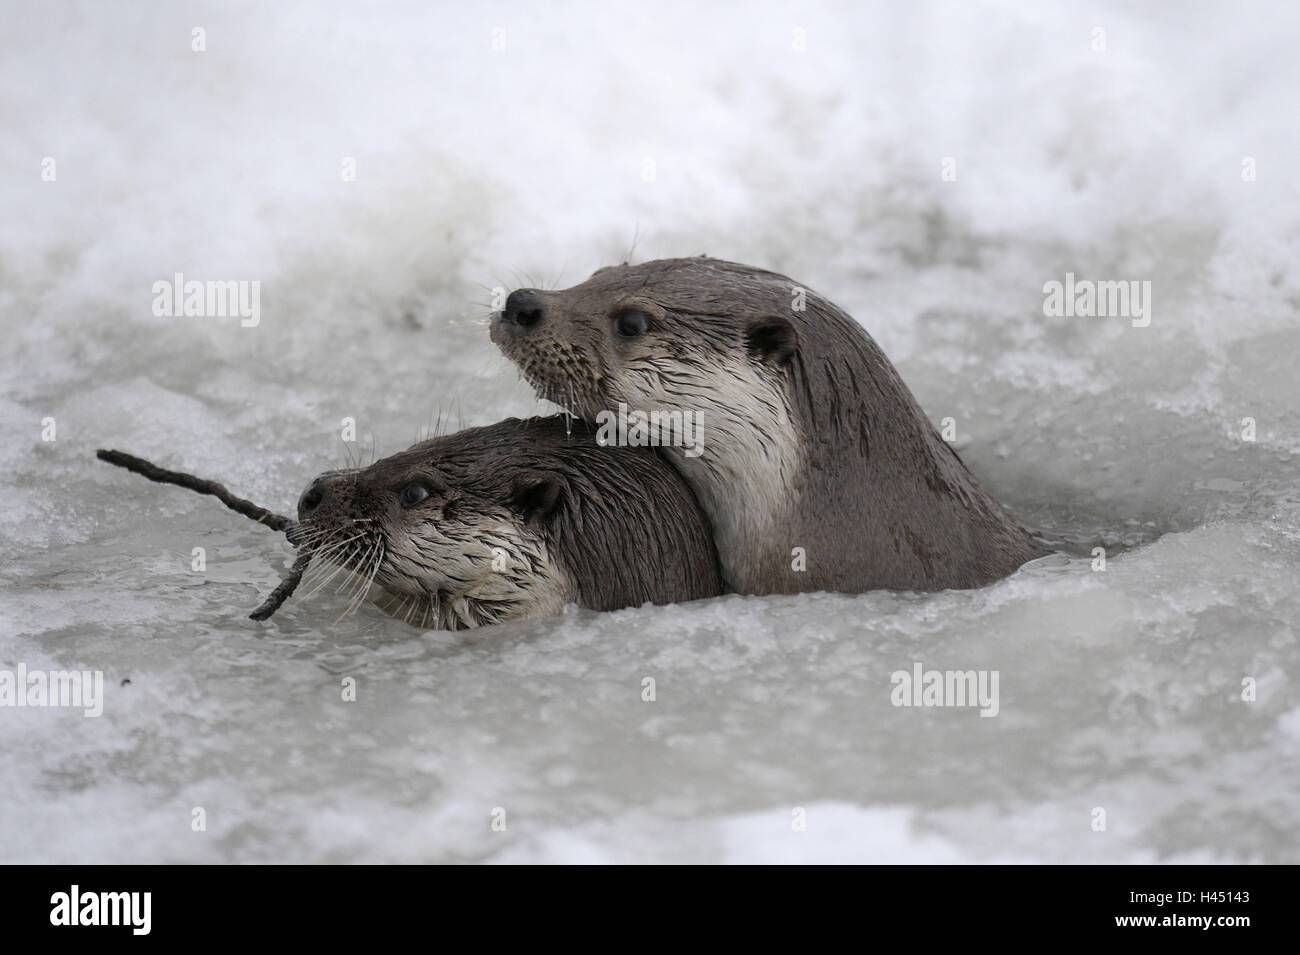 European otters, Lutra lutra, European viper, winter, ice, snow, captive, hole, look out, Stock Photo